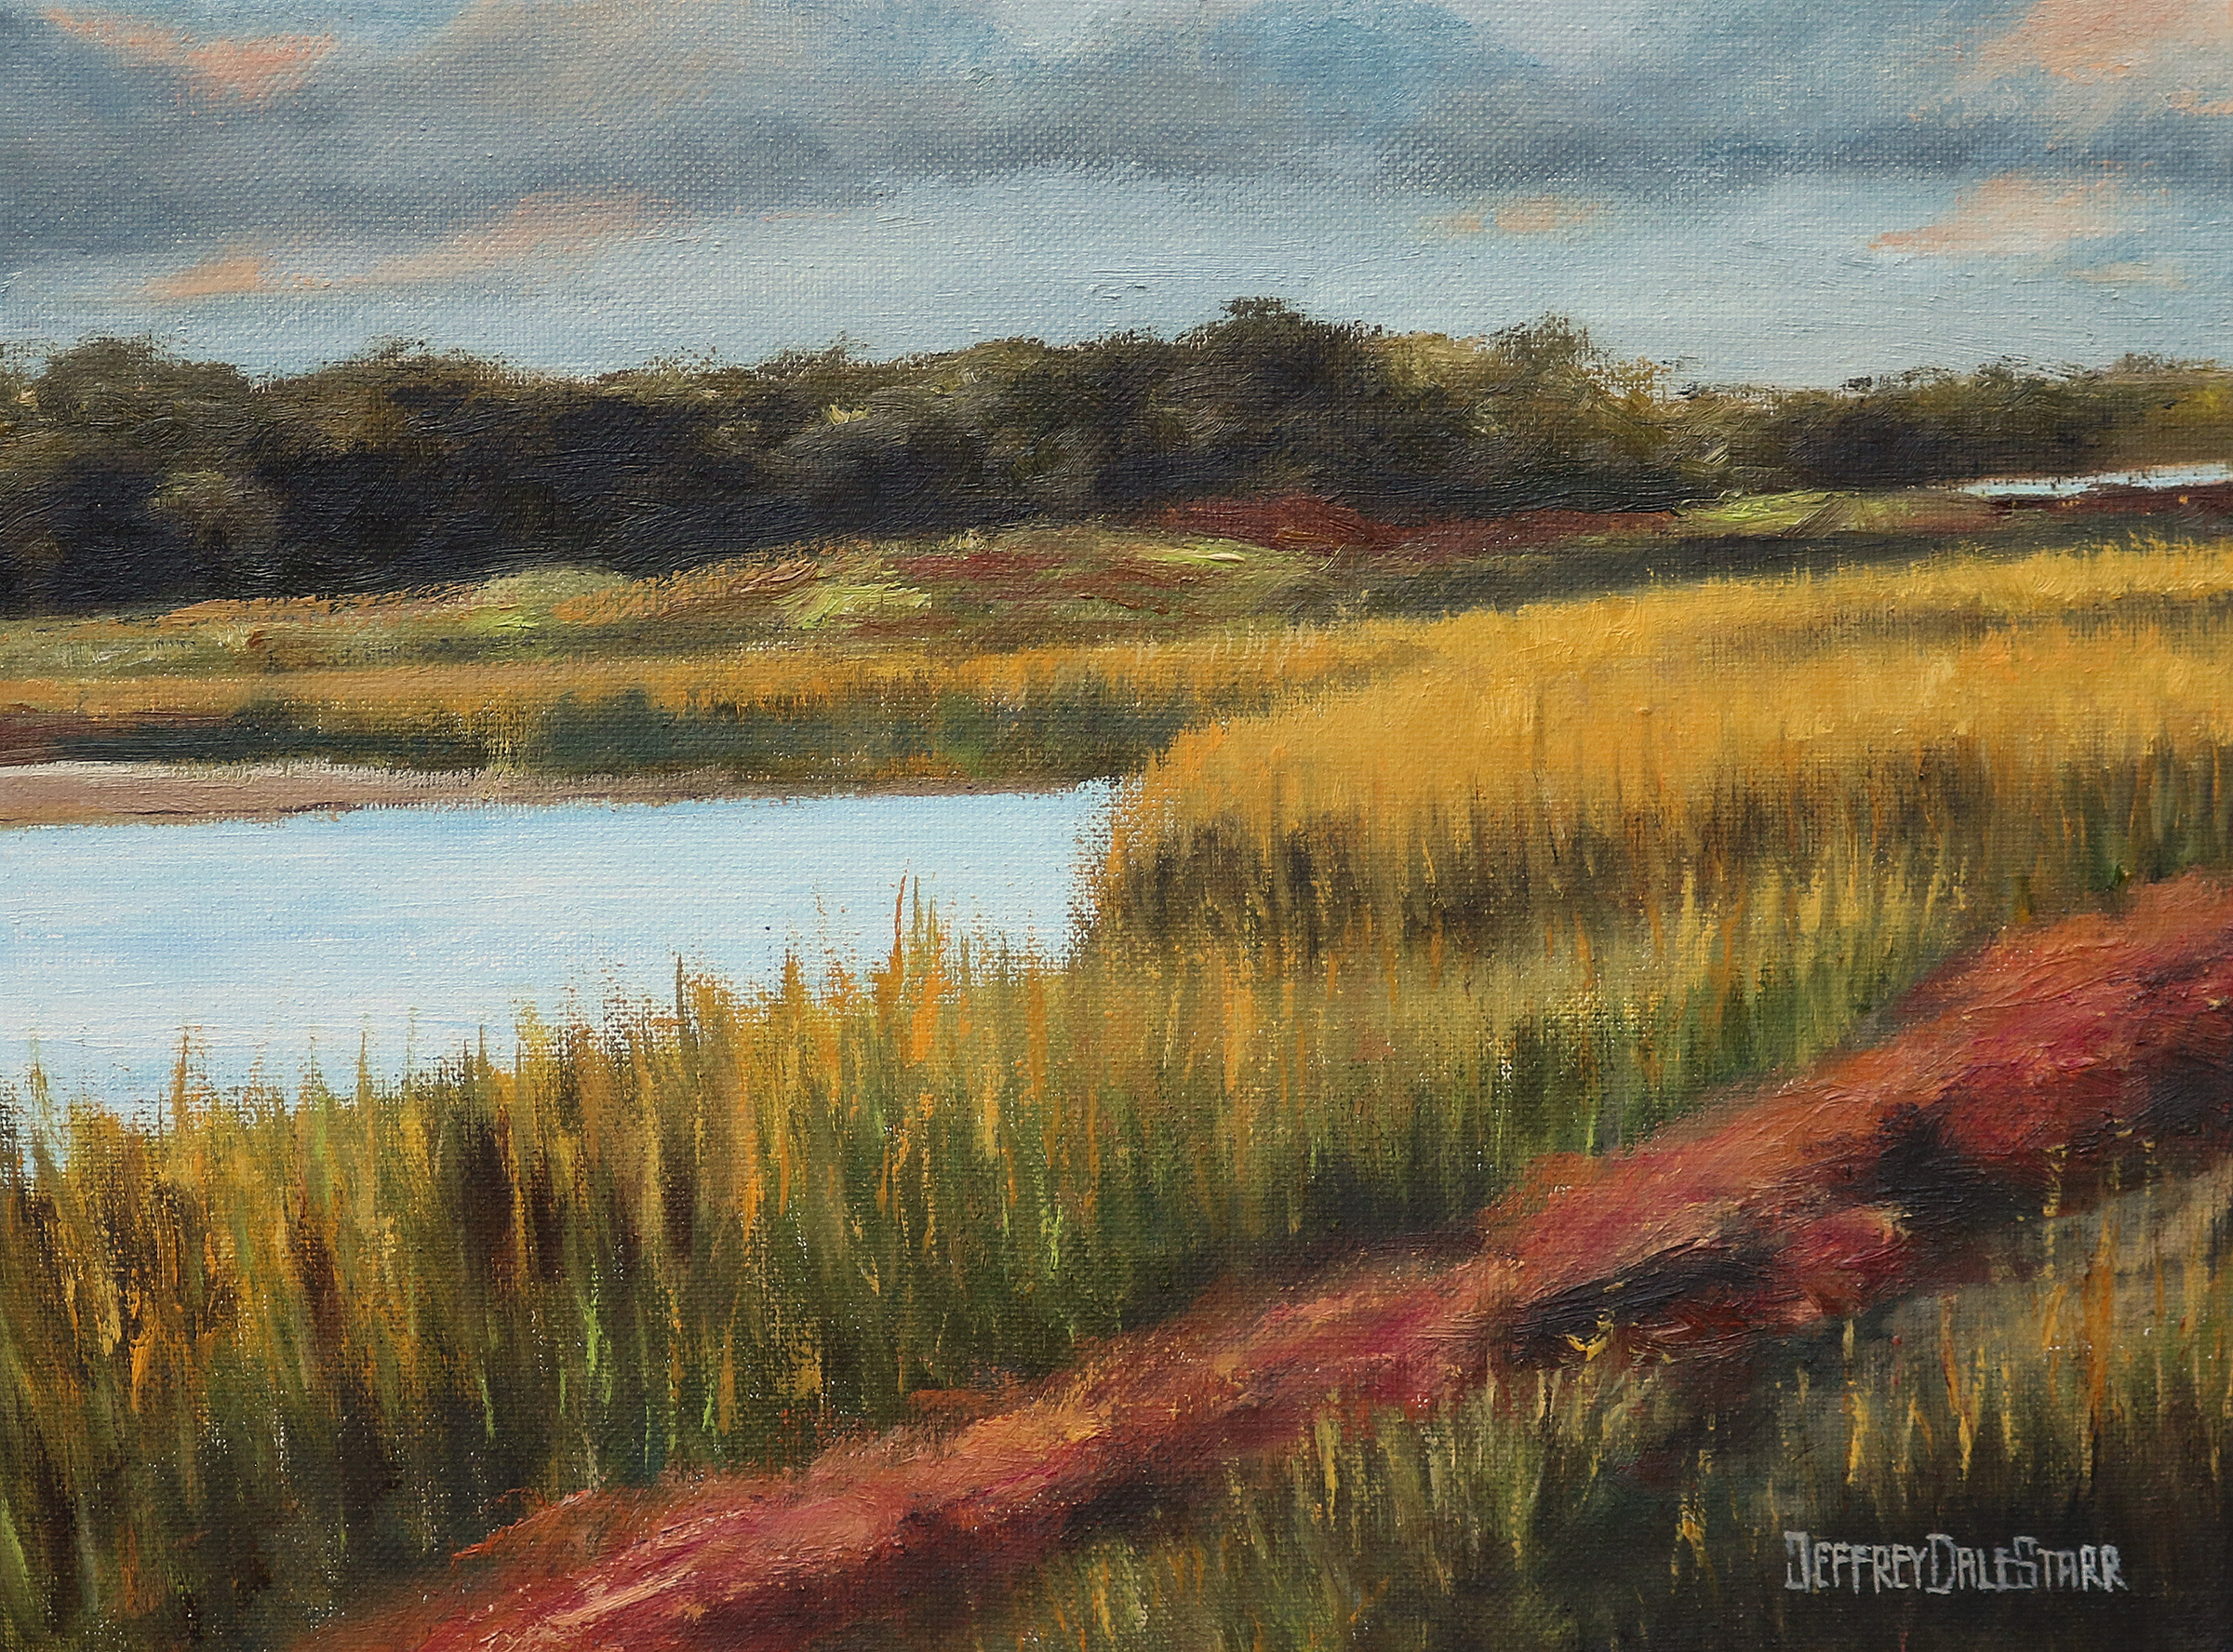 Oil painting "Grasses of Dowses Beach" by Jeffrey Dale Starr